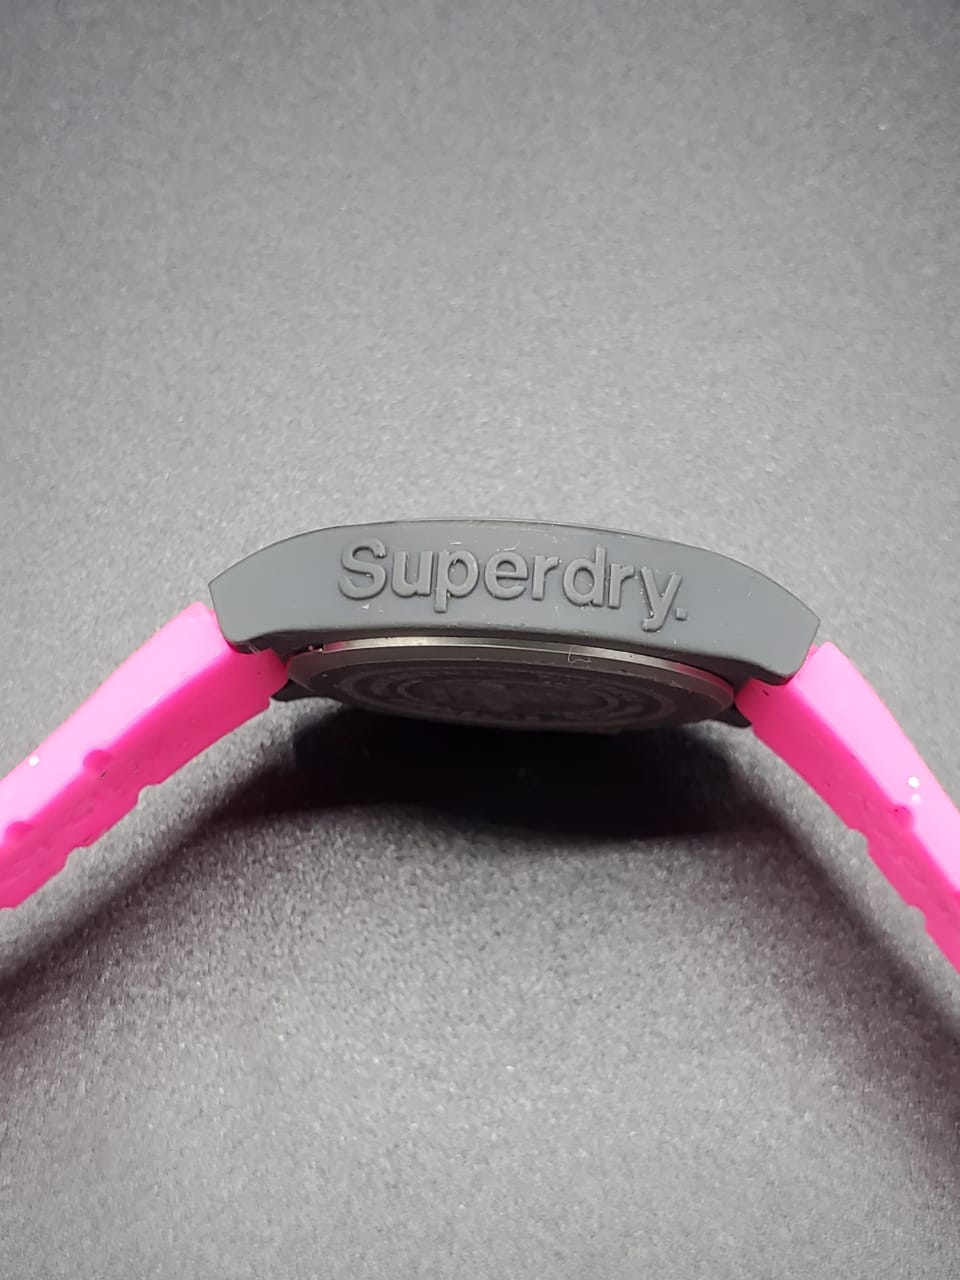 Superdry Women's Urban Quartz Watch with Silicone Strap, Pink, 18 (Model: SYL189PP)